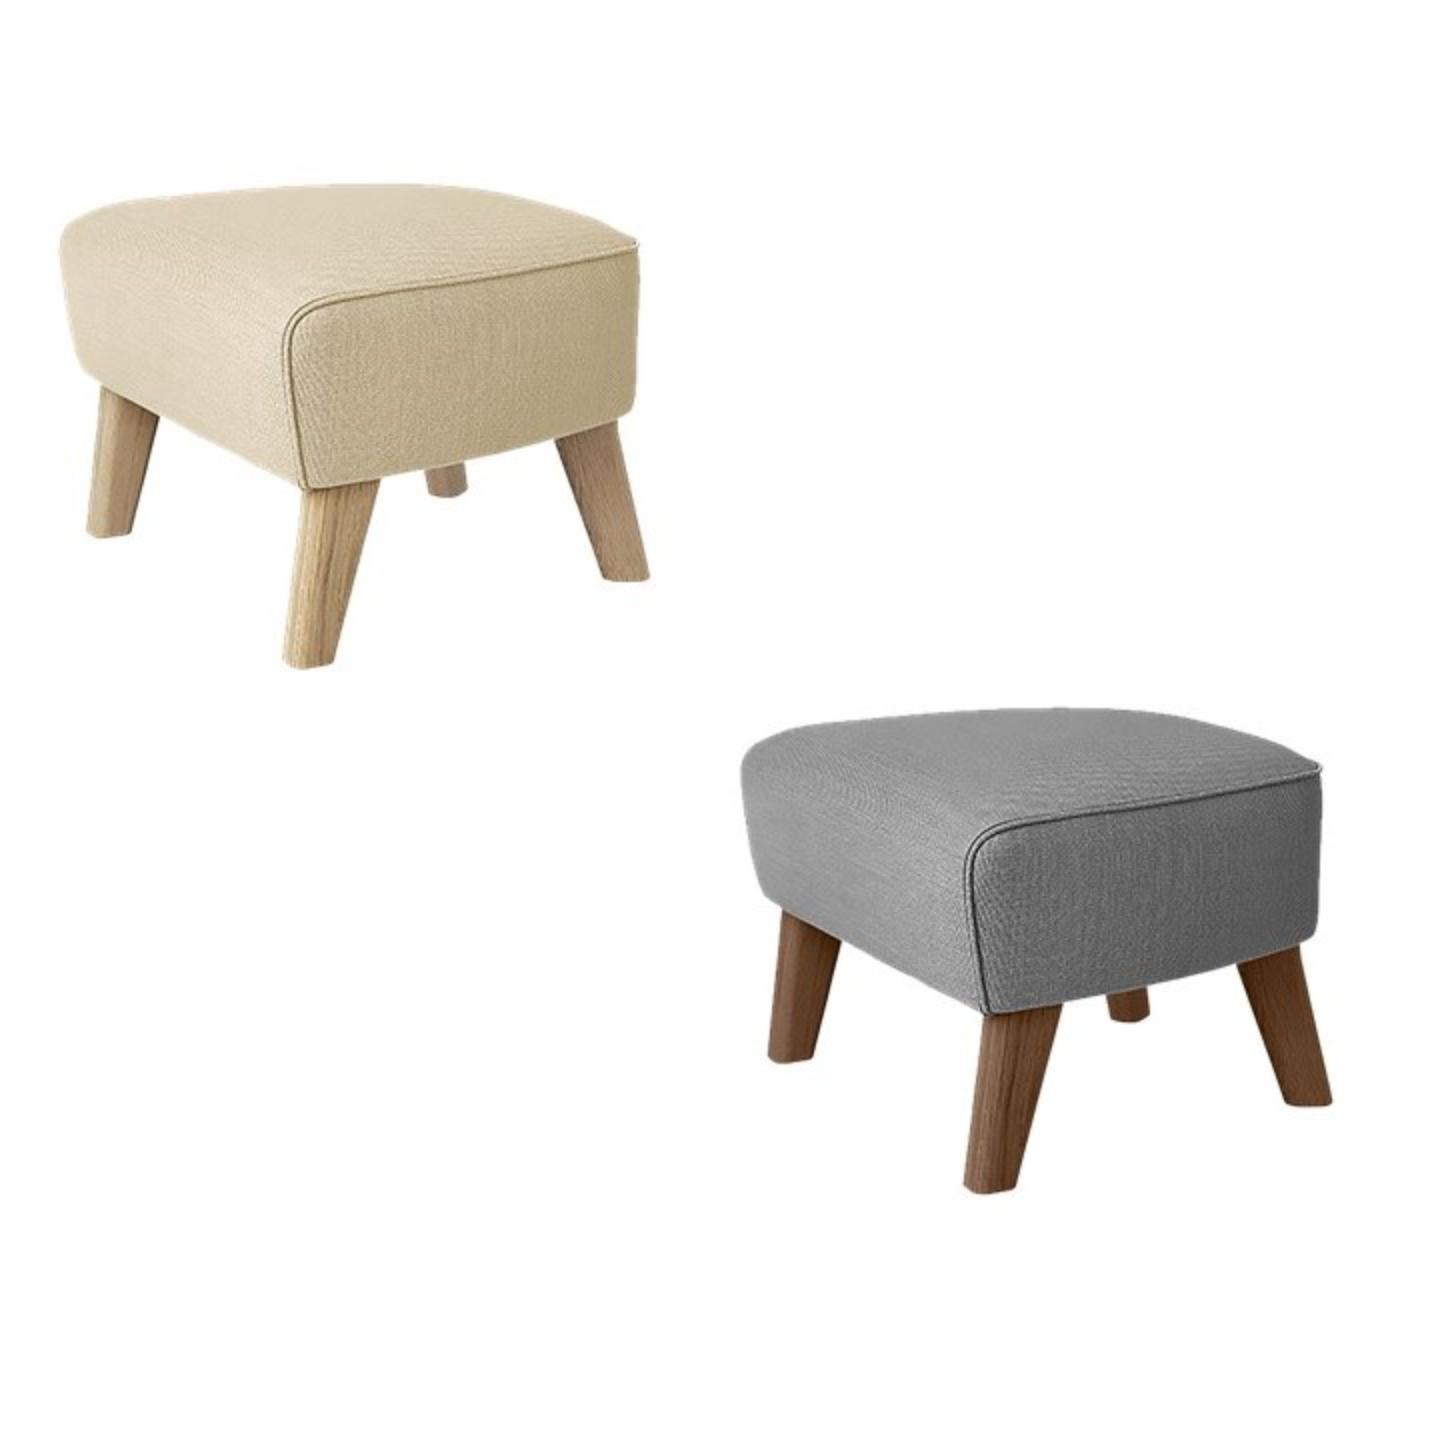 Other Set of 2 Beige and Natural Oak Sahco Zero Footstool by Lassen For Sale